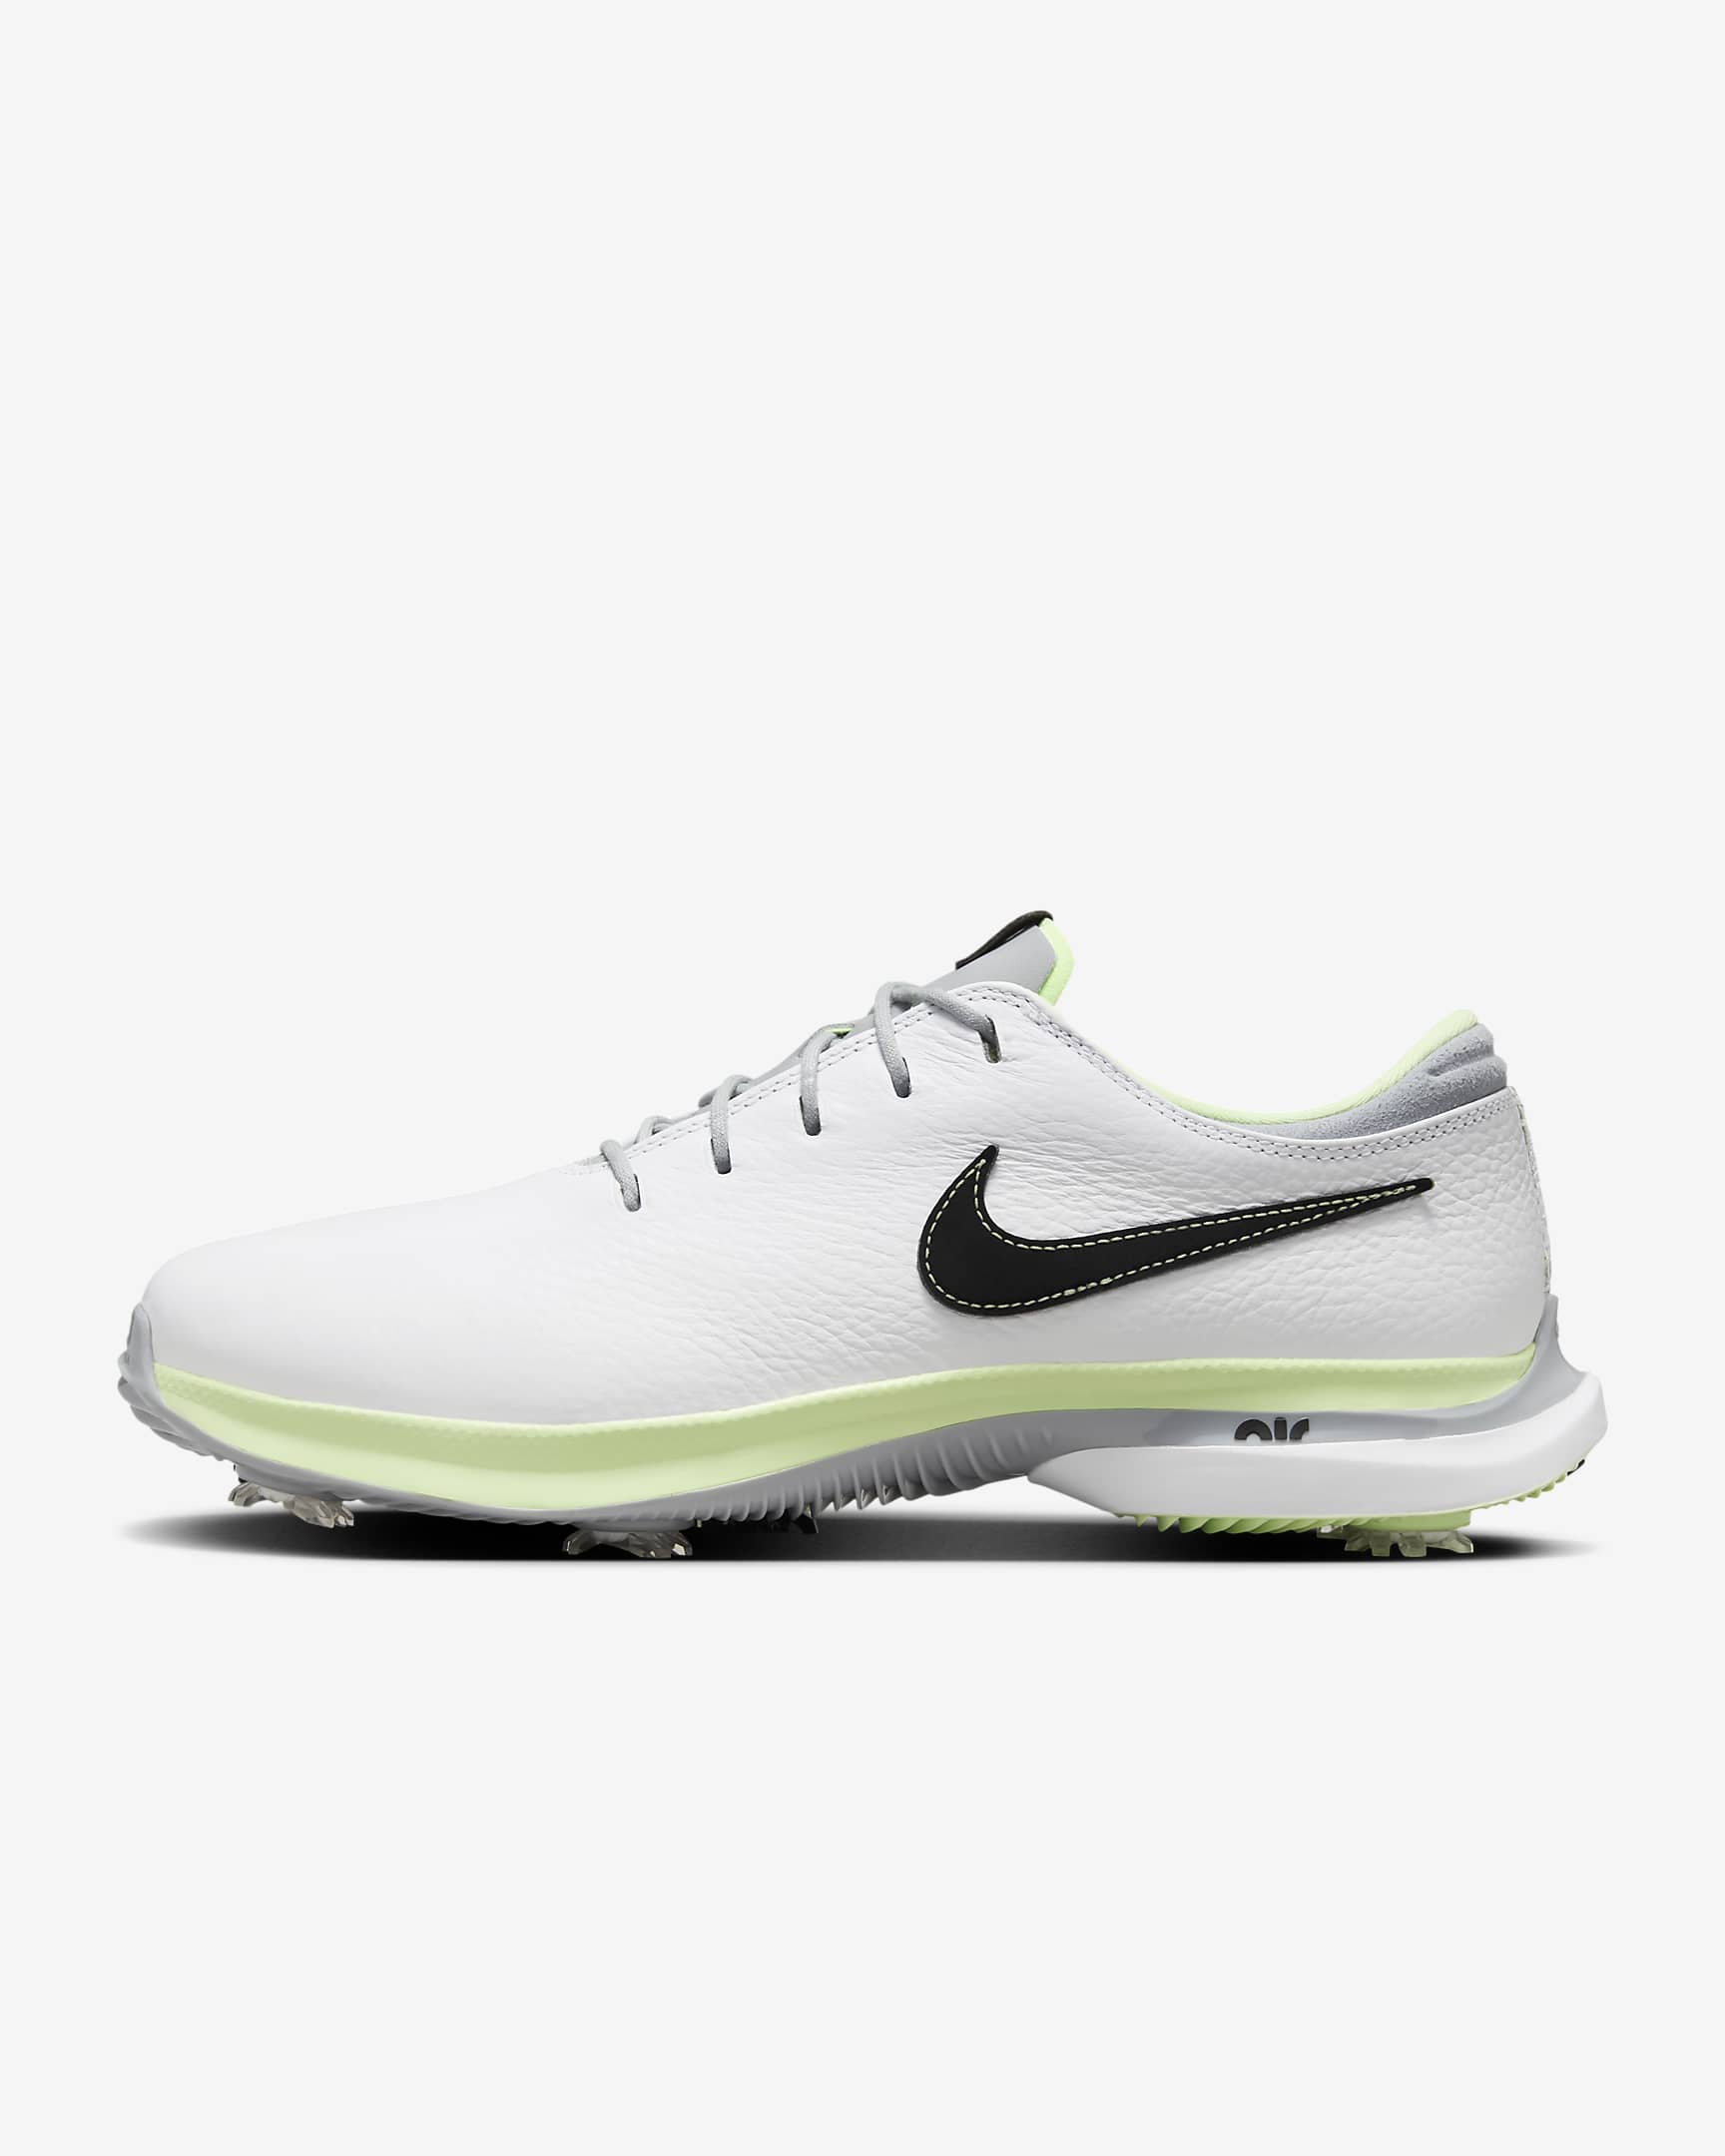 Nike Air Zoom Victory Tour 3 Men's Golf Shoes - White/Barely Volt/Wolf Grey/Black